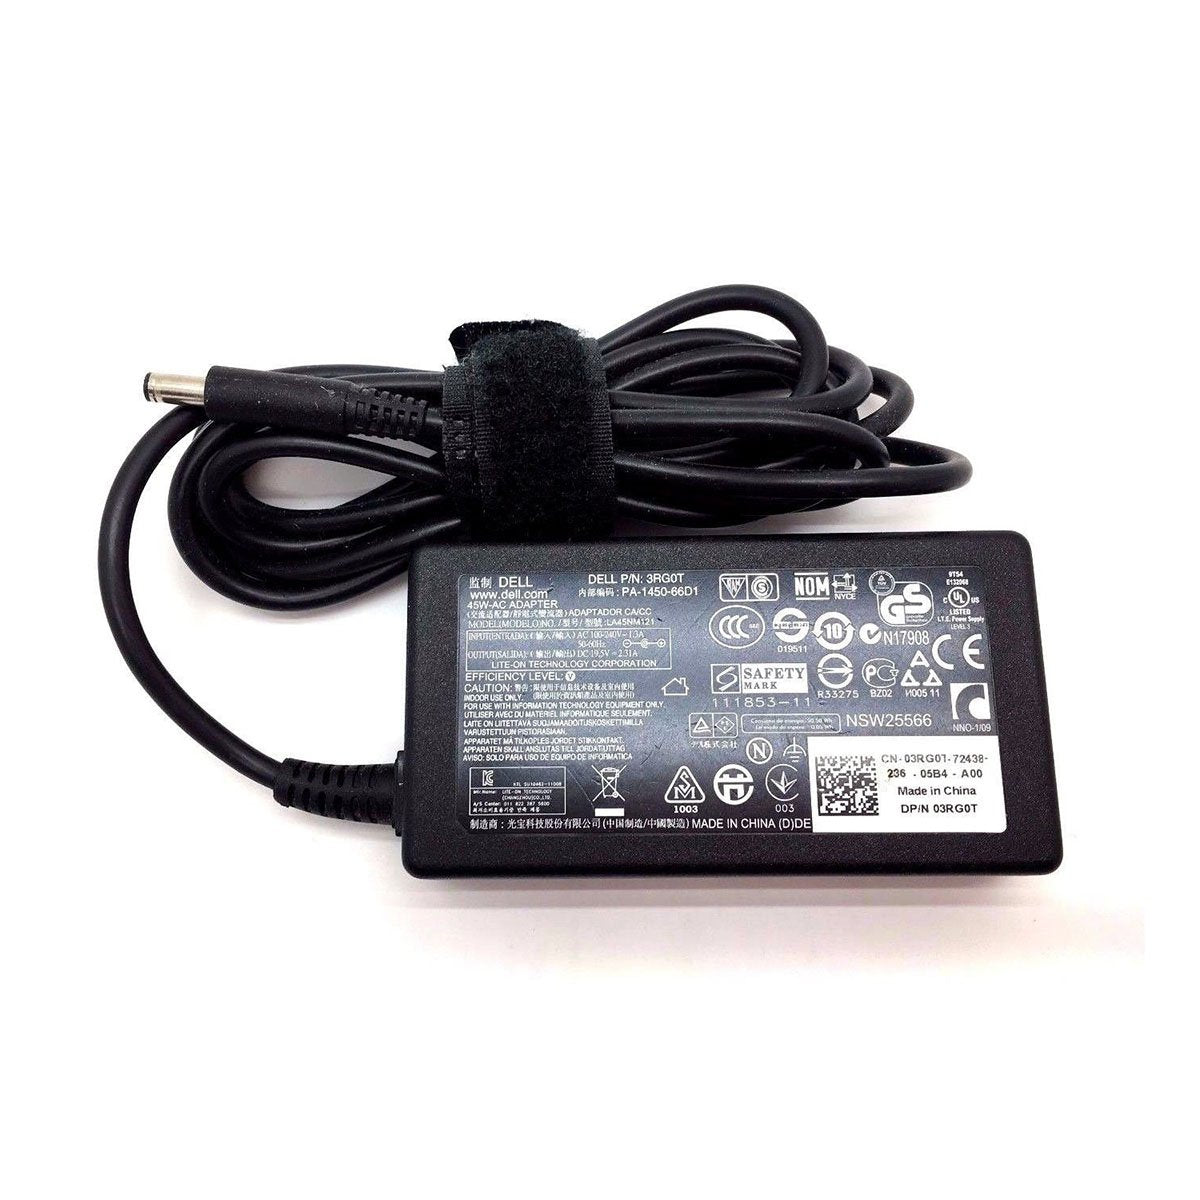 Dell Inspiron 15 7569 Original 45W Laptop Charger Adapter With Power Cord 19.5V 4.5mm Pin